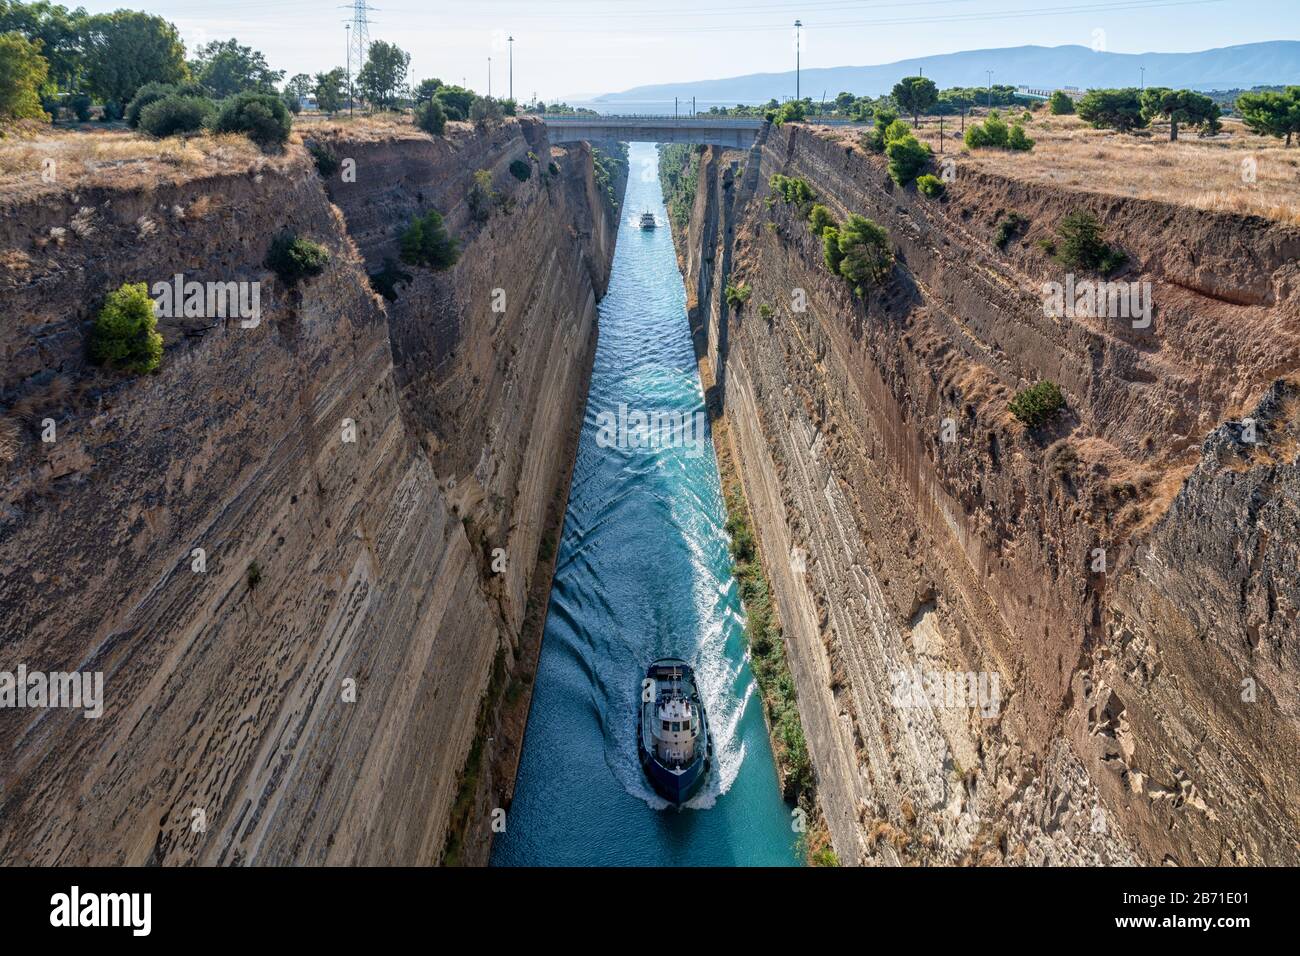 Boats in the Corinth Canal Stock Photo